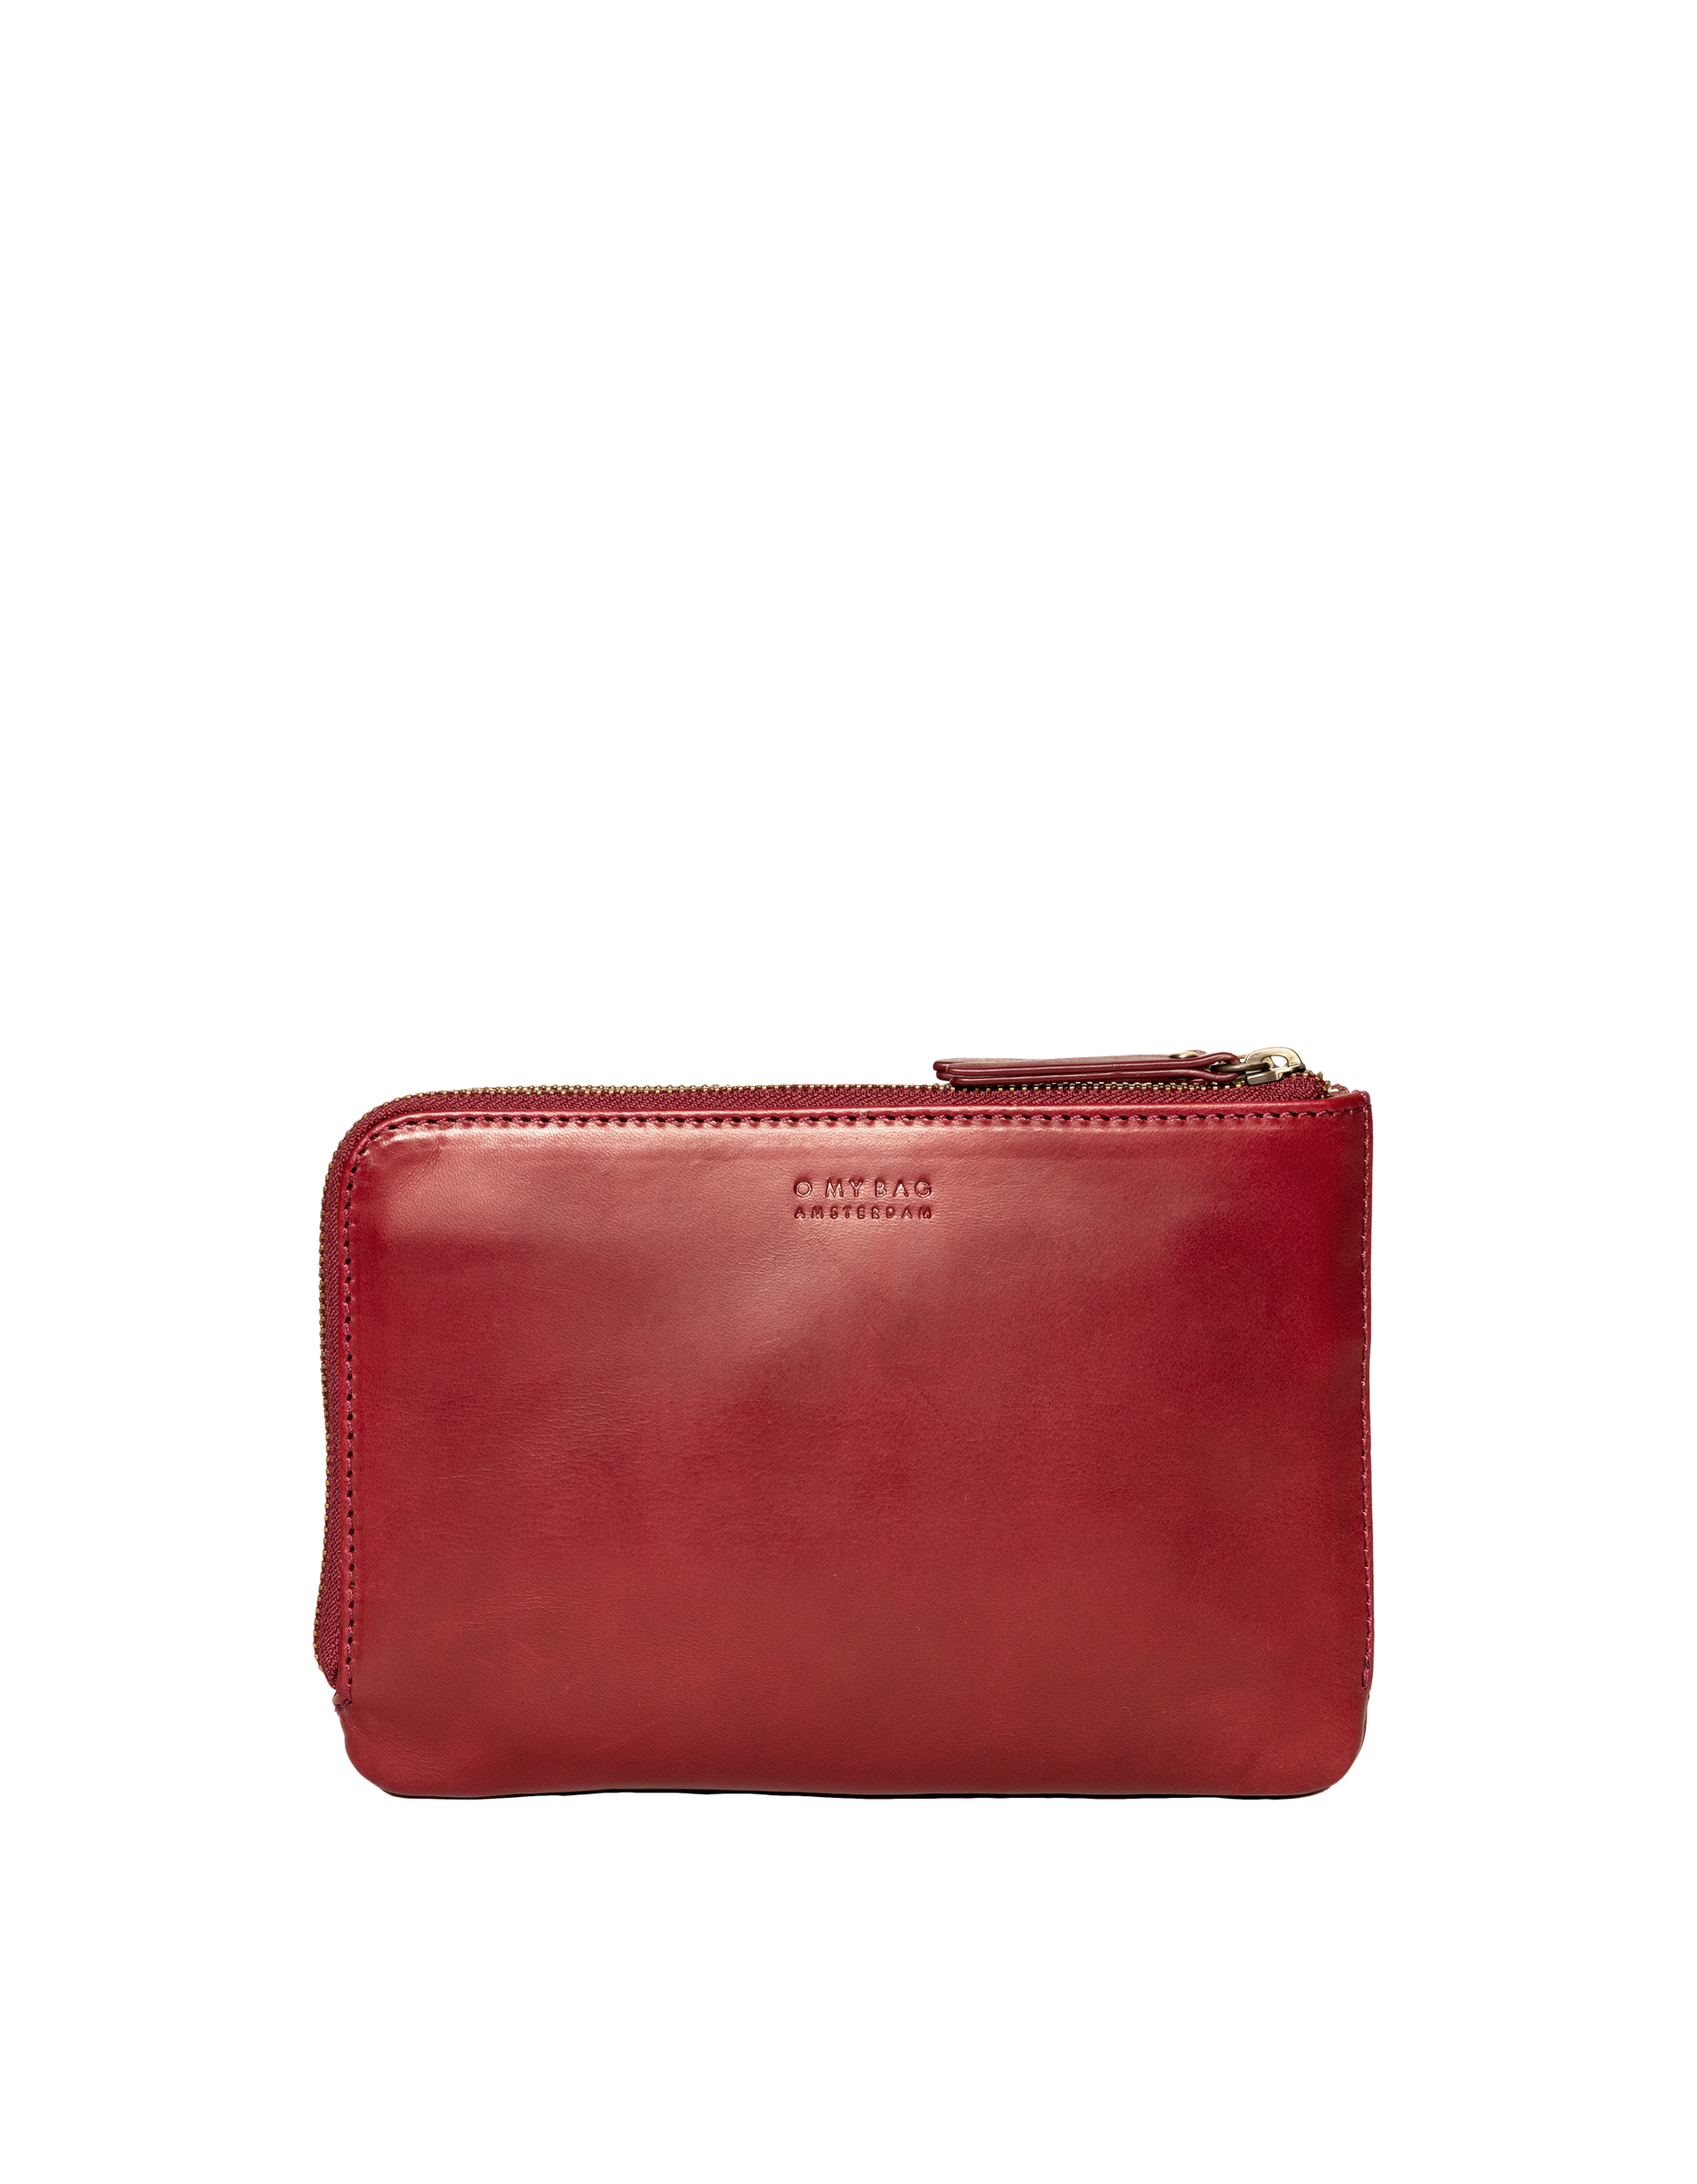 Lola Ruby Classic Croco Leather. Small Rectangular crossbody clutch bag for women with two zipper compartments. Front product image.